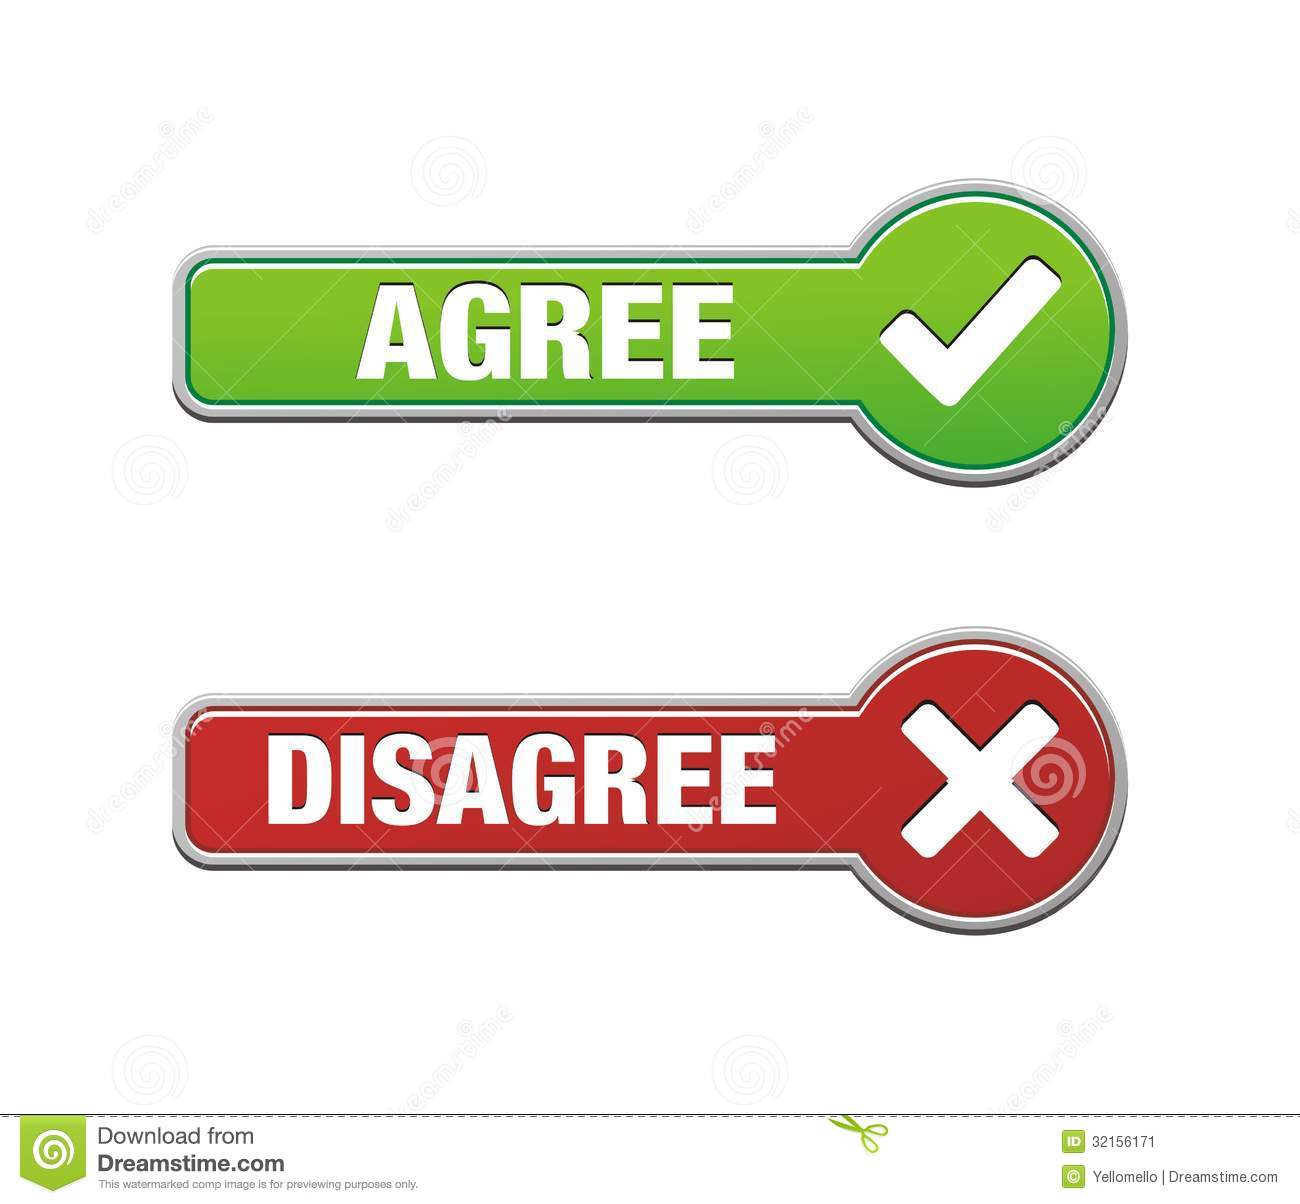 Agree And Disagree Button Sets Stock Image   Image  32156171